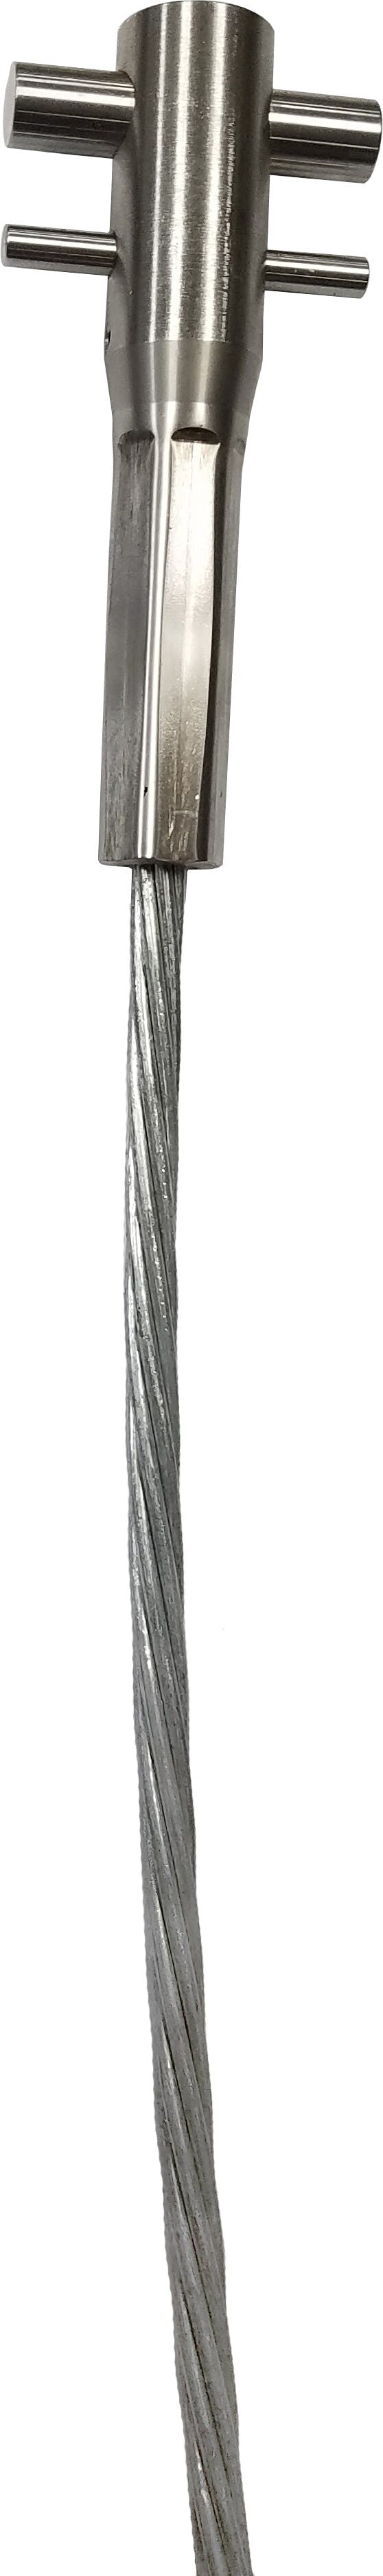 3M™ DBI-SALA® Lad-Saf™ Swaged Cable 6115032, 3/8 Inch, Stainless Steel, 25 m_0